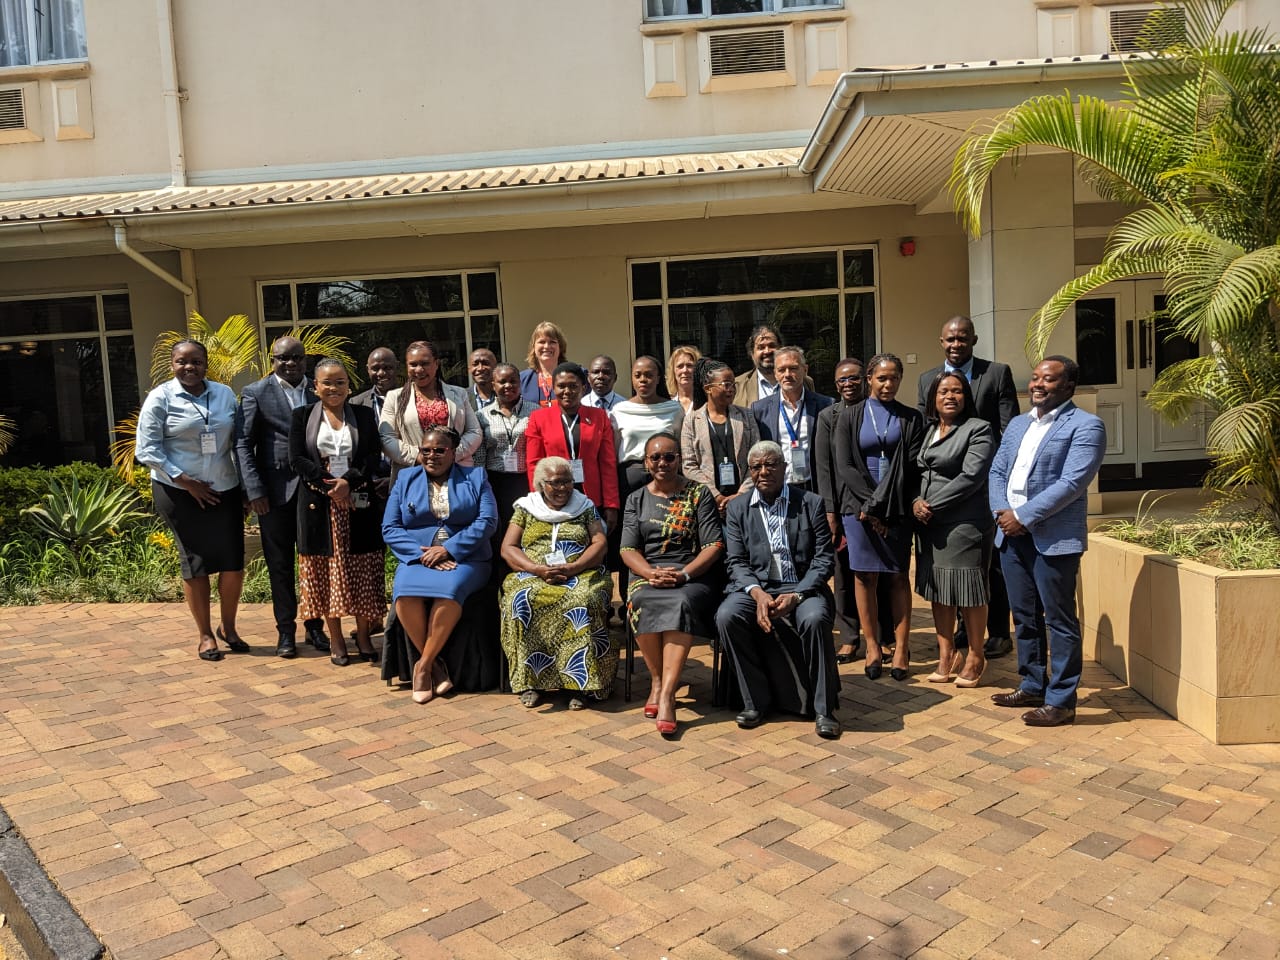 A group photo taken to commemorate the consultative meeting promoting the ratification of the AU Protocol on social protection and social security in Lusaka, Zambia.